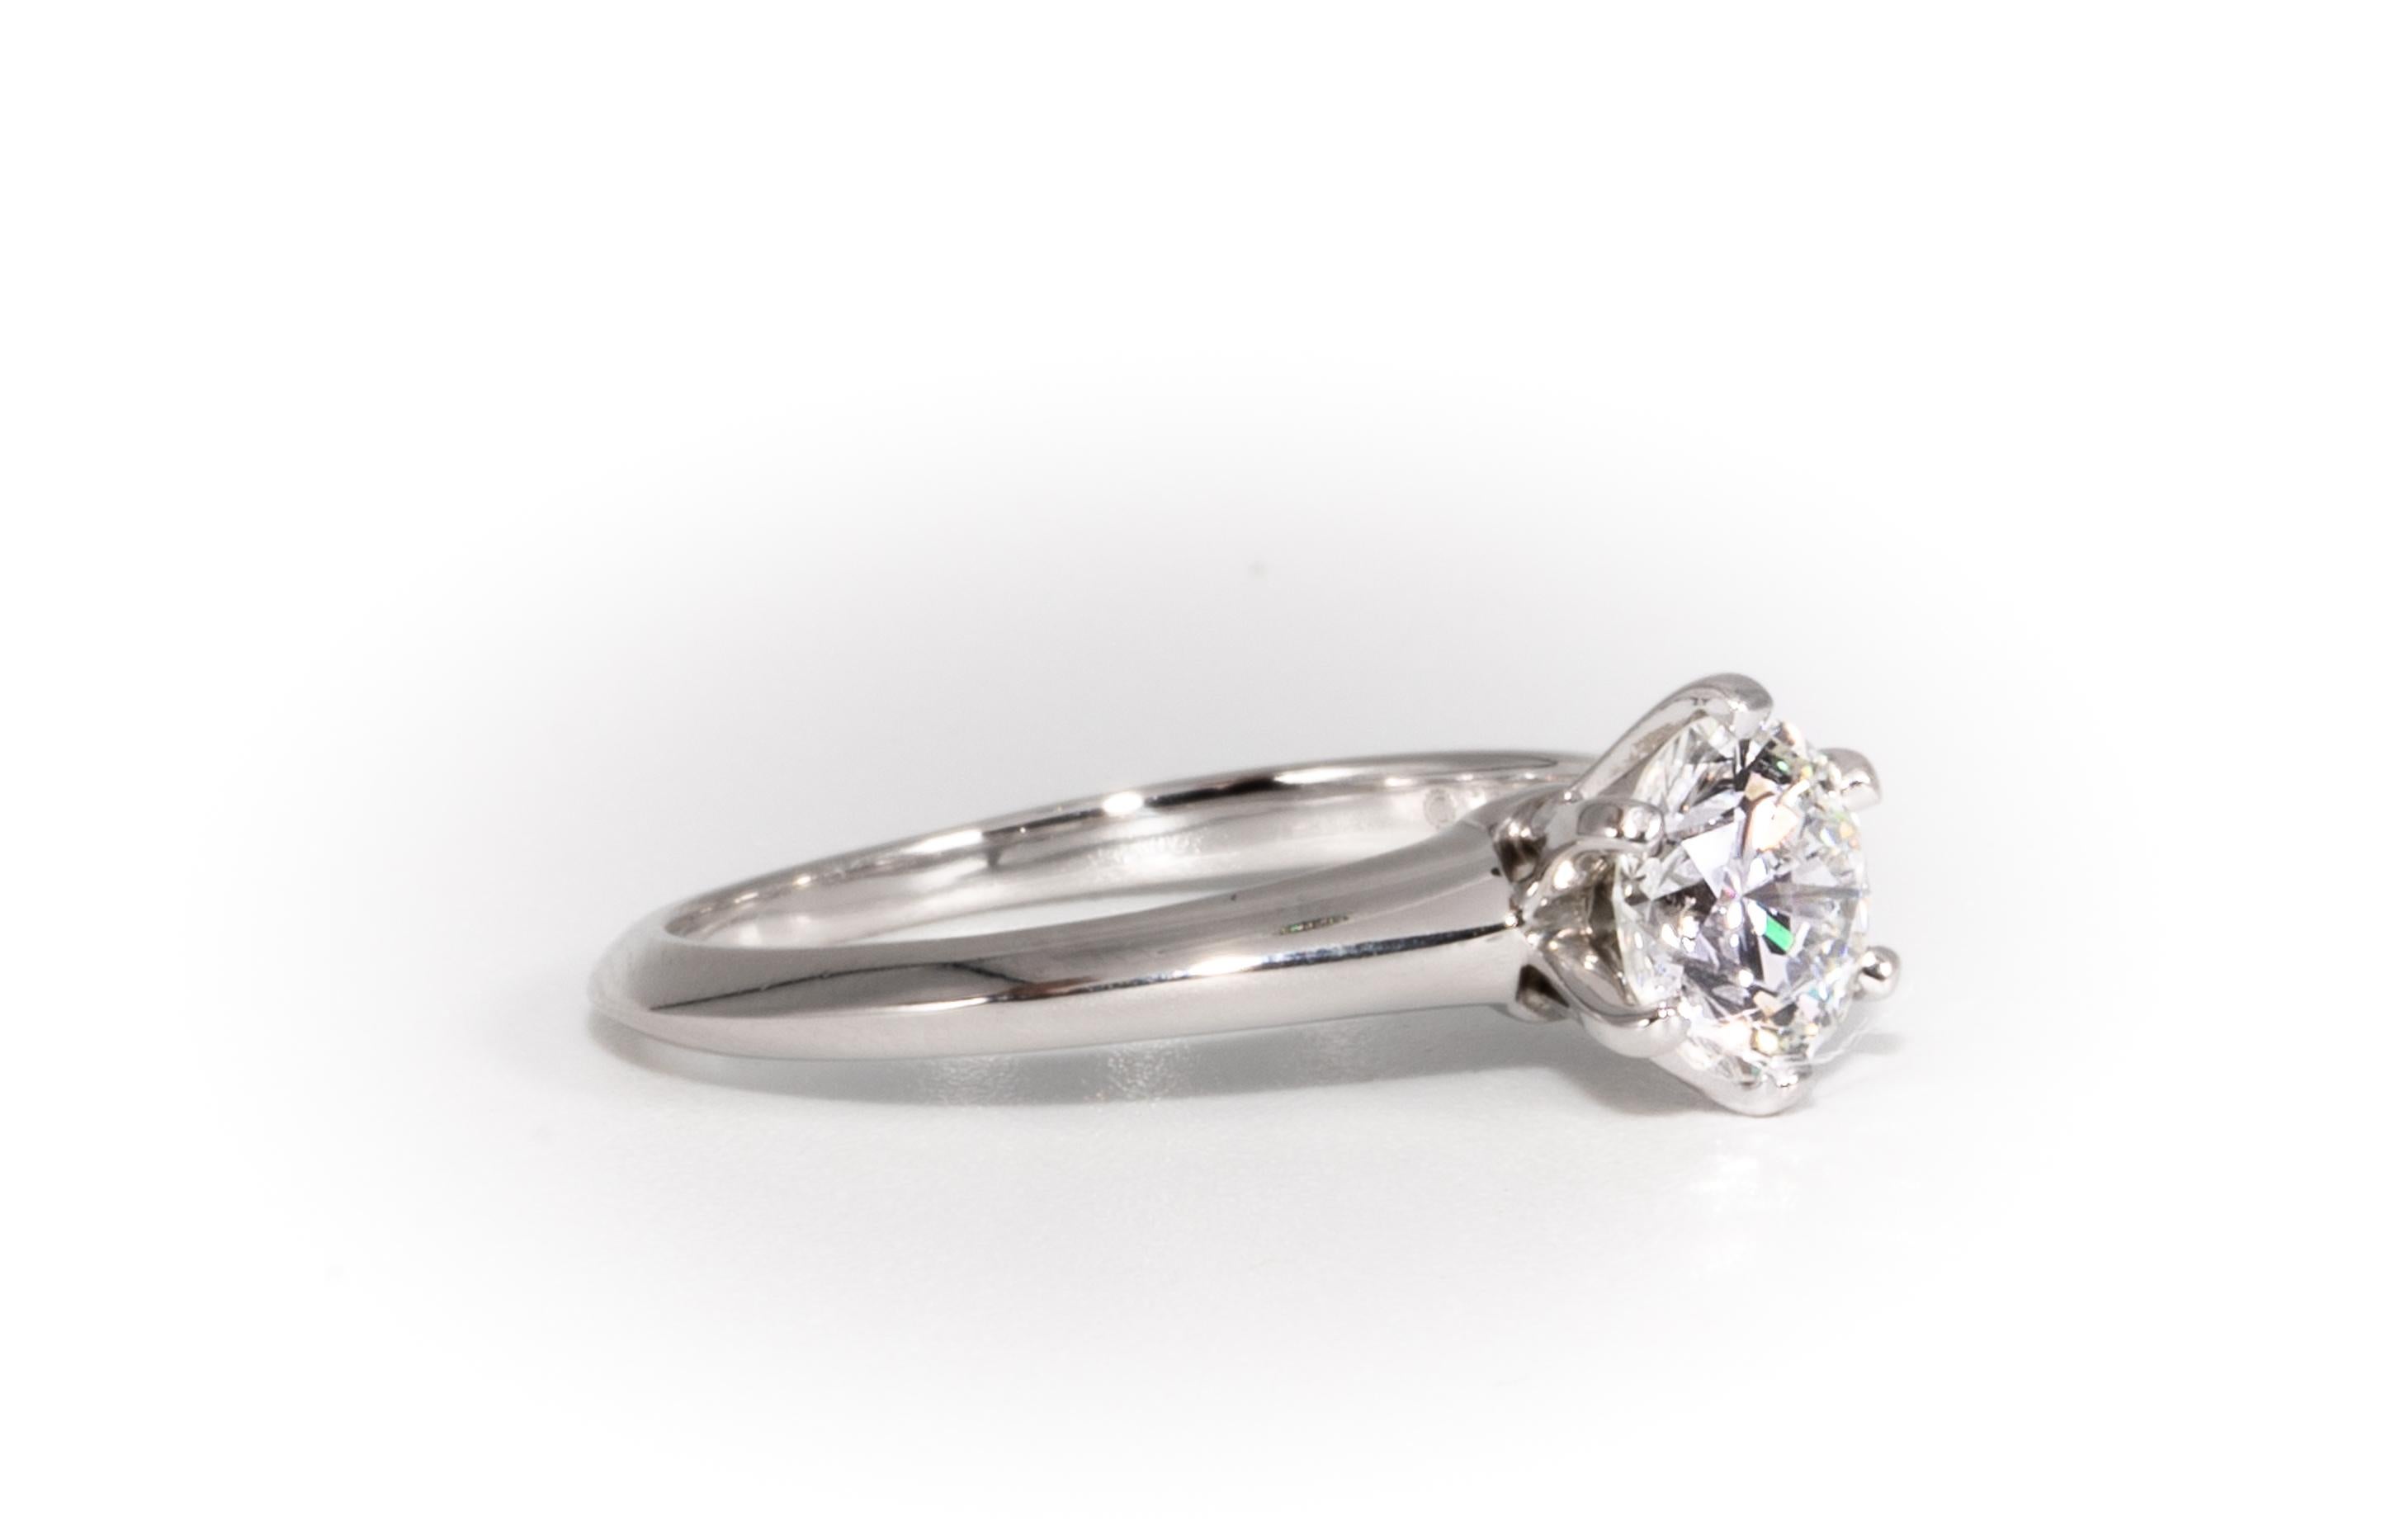 Tiffany & Co. Diamond Engagement Solitaire signed by Tiffany & Co. featuring a .91 ct Center, graded H color , and VS1 Clarity.
In Platinum

Crown Inscription: T&Co. 21193674
Includes Original Tiffany Certificate, and Box
Approximate Retail from